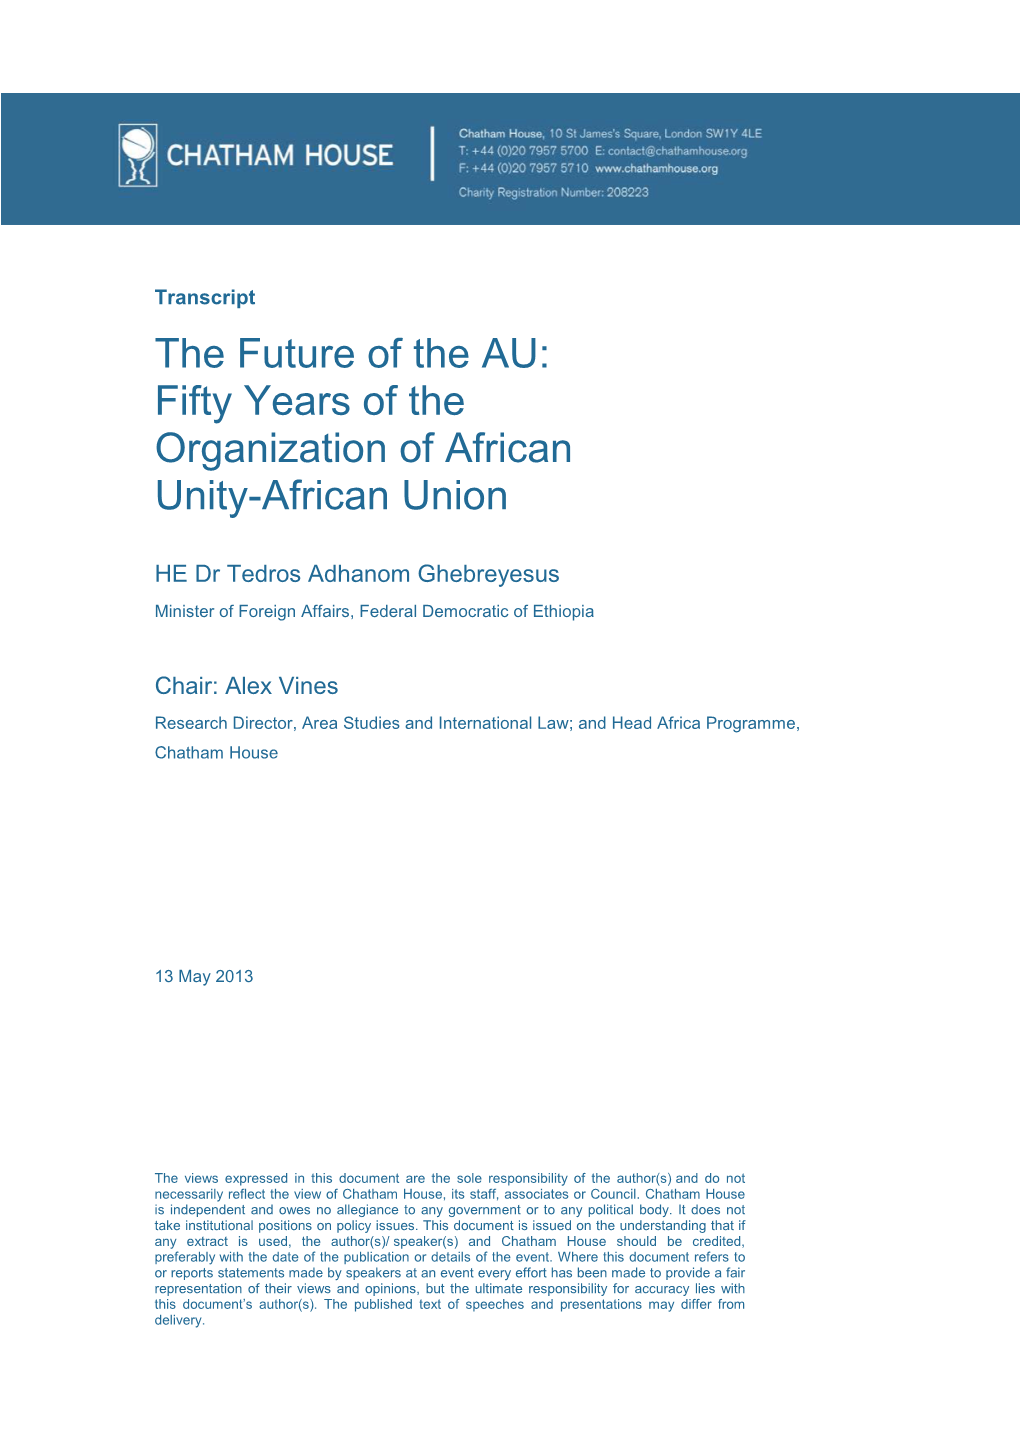 The Future of the AU: Fifty Years of the Organization of African Unity-African Union